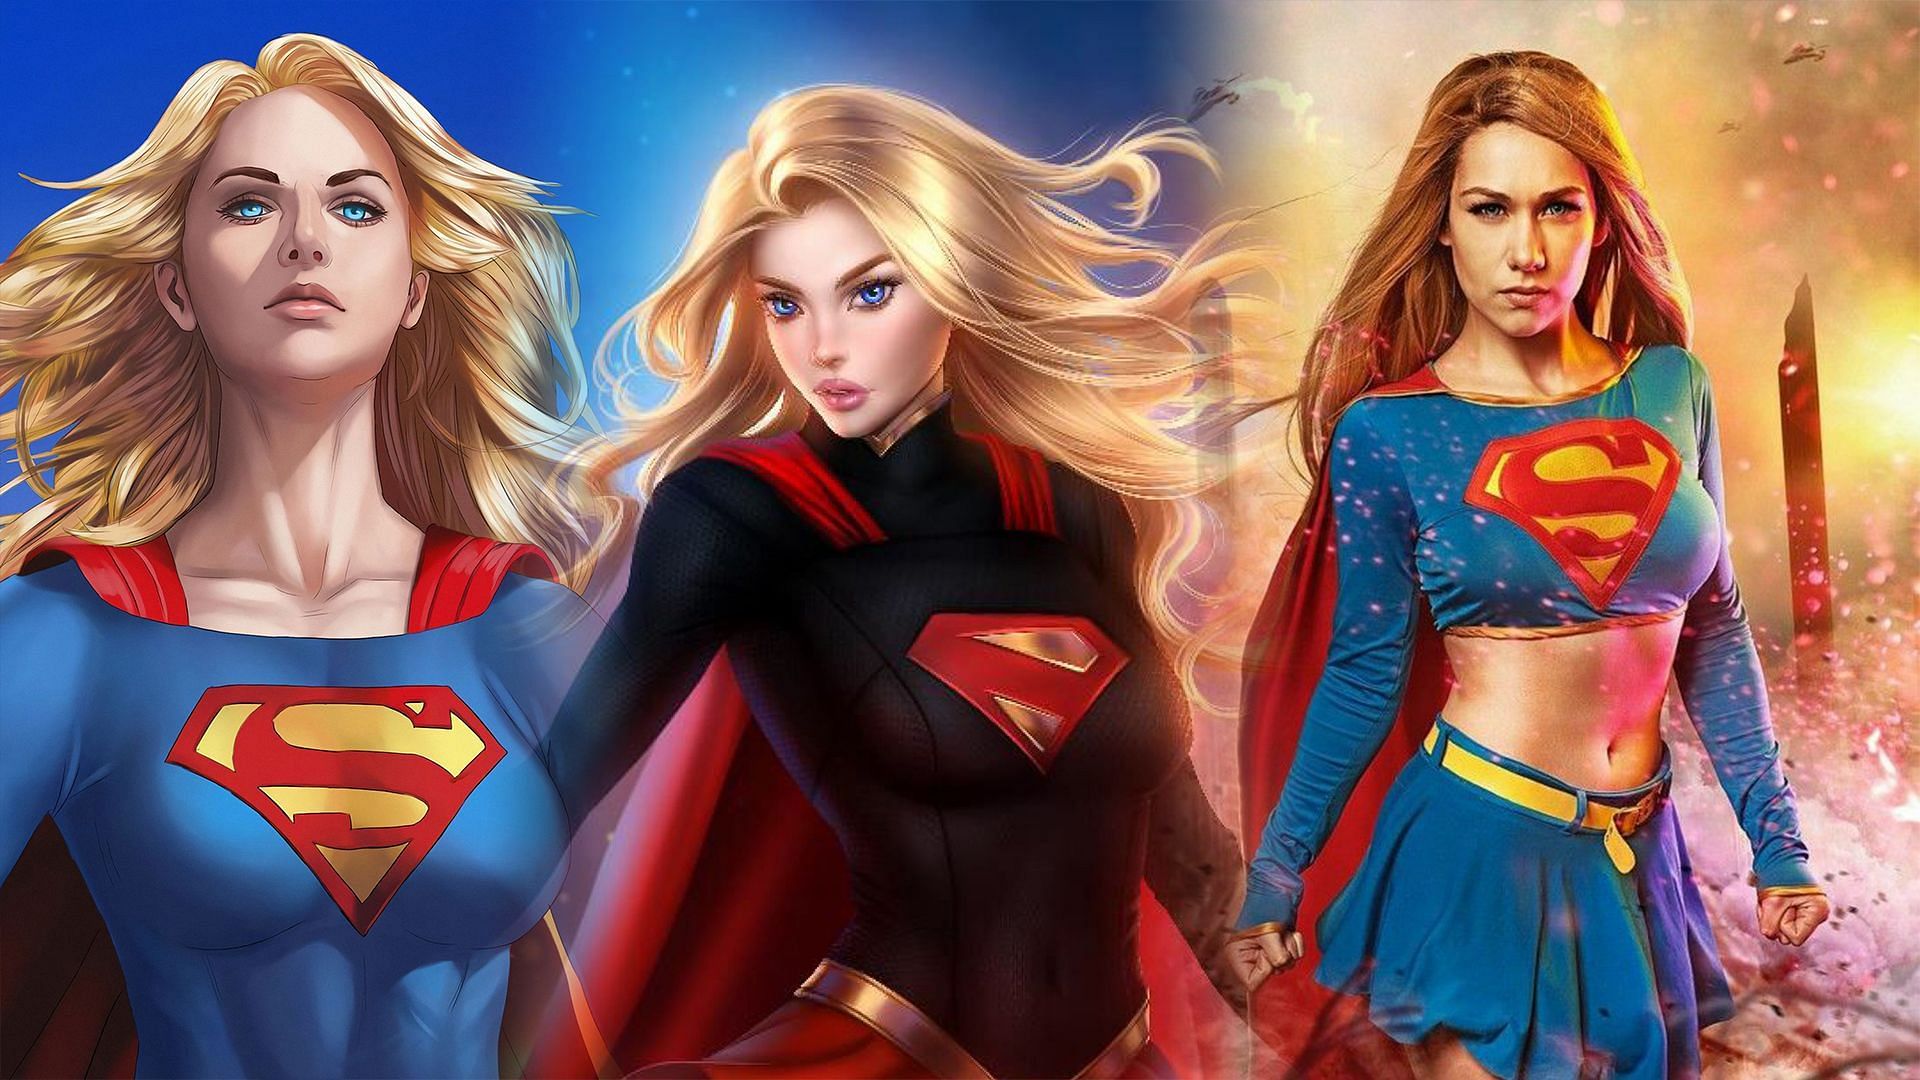 Supergirl and Ruthye stand together as a united force, determined to bring the vilest of villains to justice. (Image via Sportskeeda)